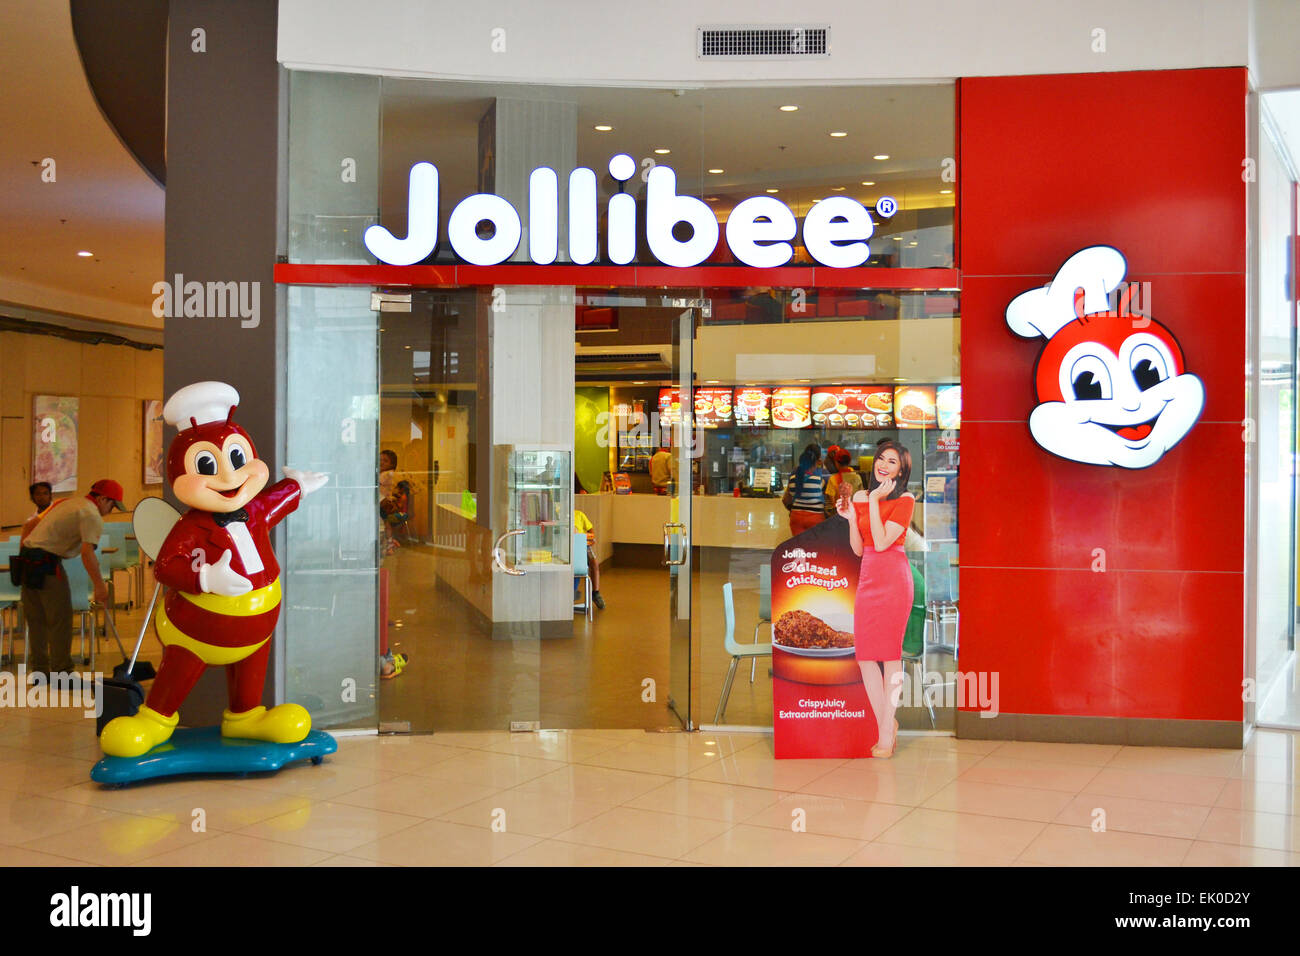 Jollibee Fast Food Restaurant Jollibee Is One Of The Most Famous